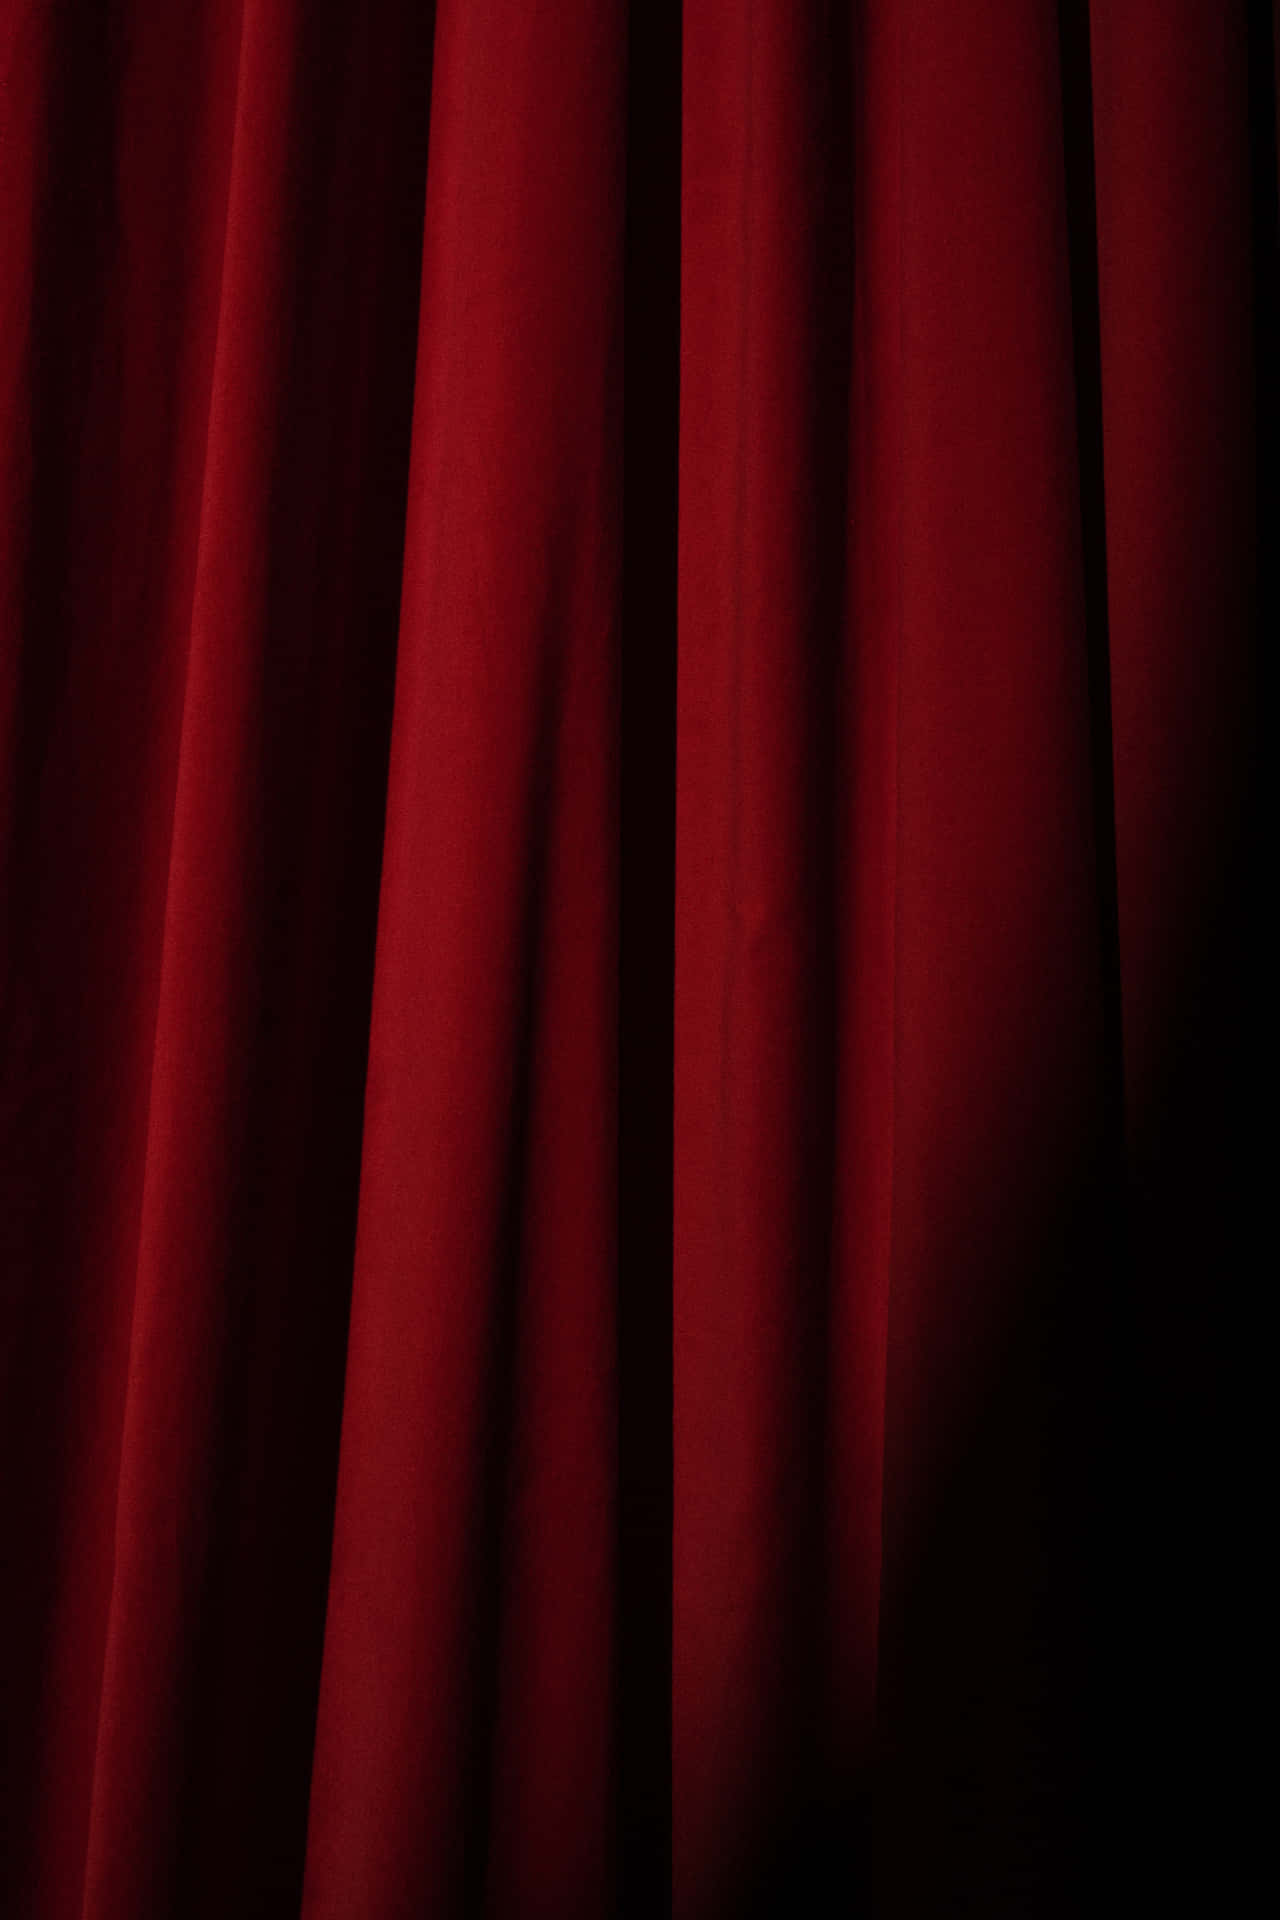 Dramatic presentation of a red velvet curtain